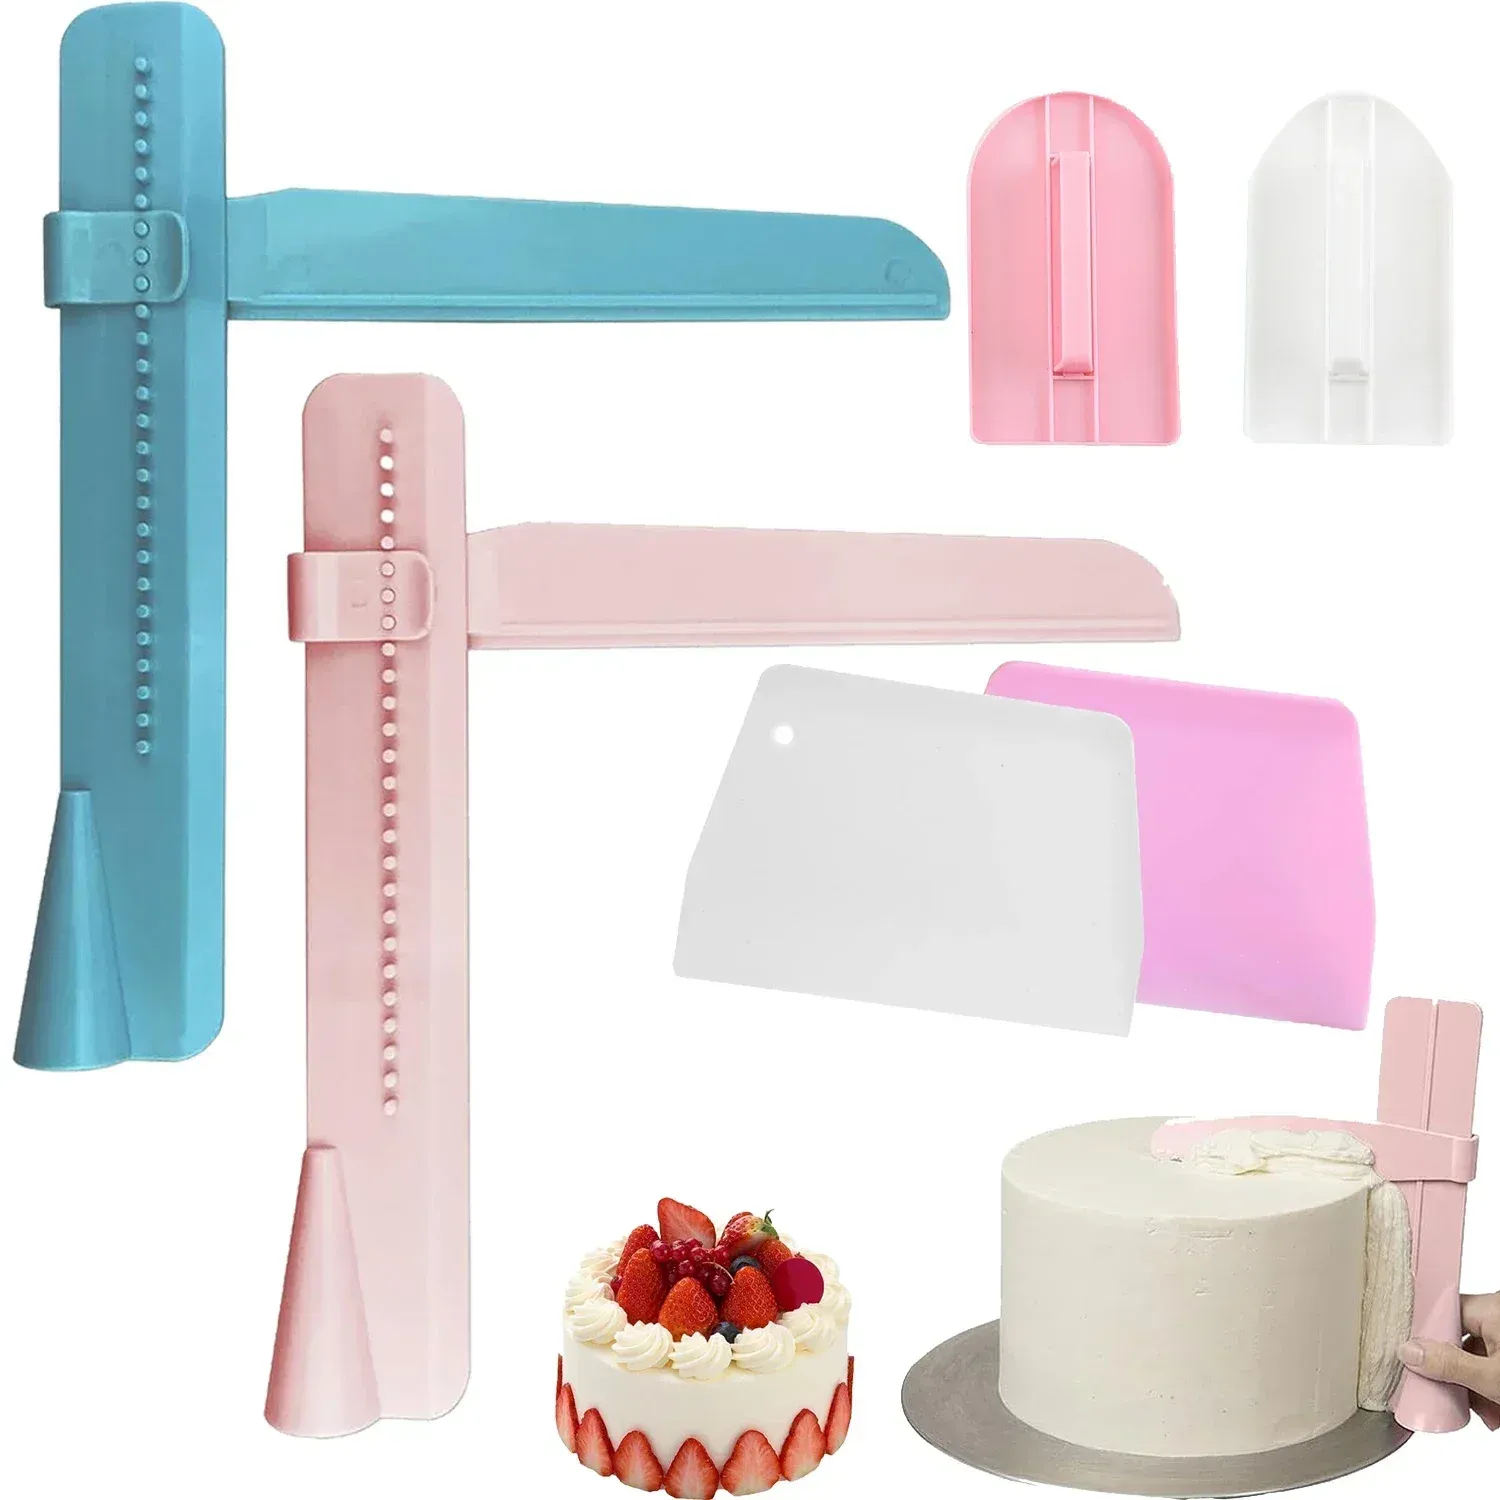 Moulds Cake Scraper Smoother Adjustable Fondant Spatulas Cake Edge Smoother Cream Leveling Device DIY Baking Tools Cakes Pastry Spatula